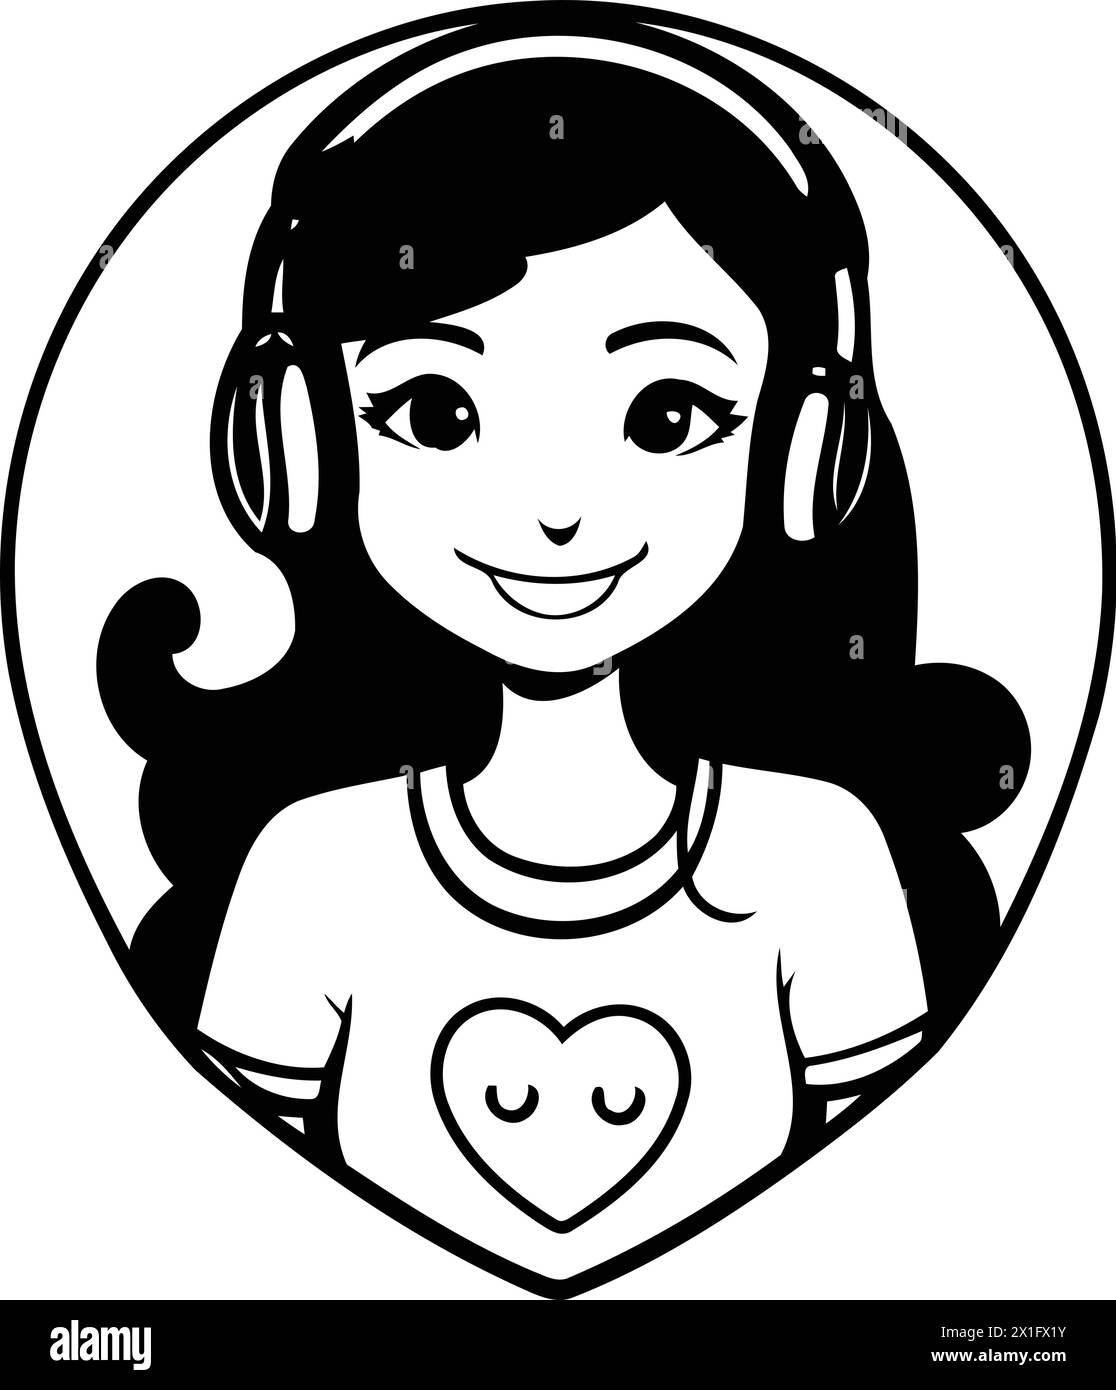 Cute girl with headphones and heart in her hand. Vector illustration. Stock Vector